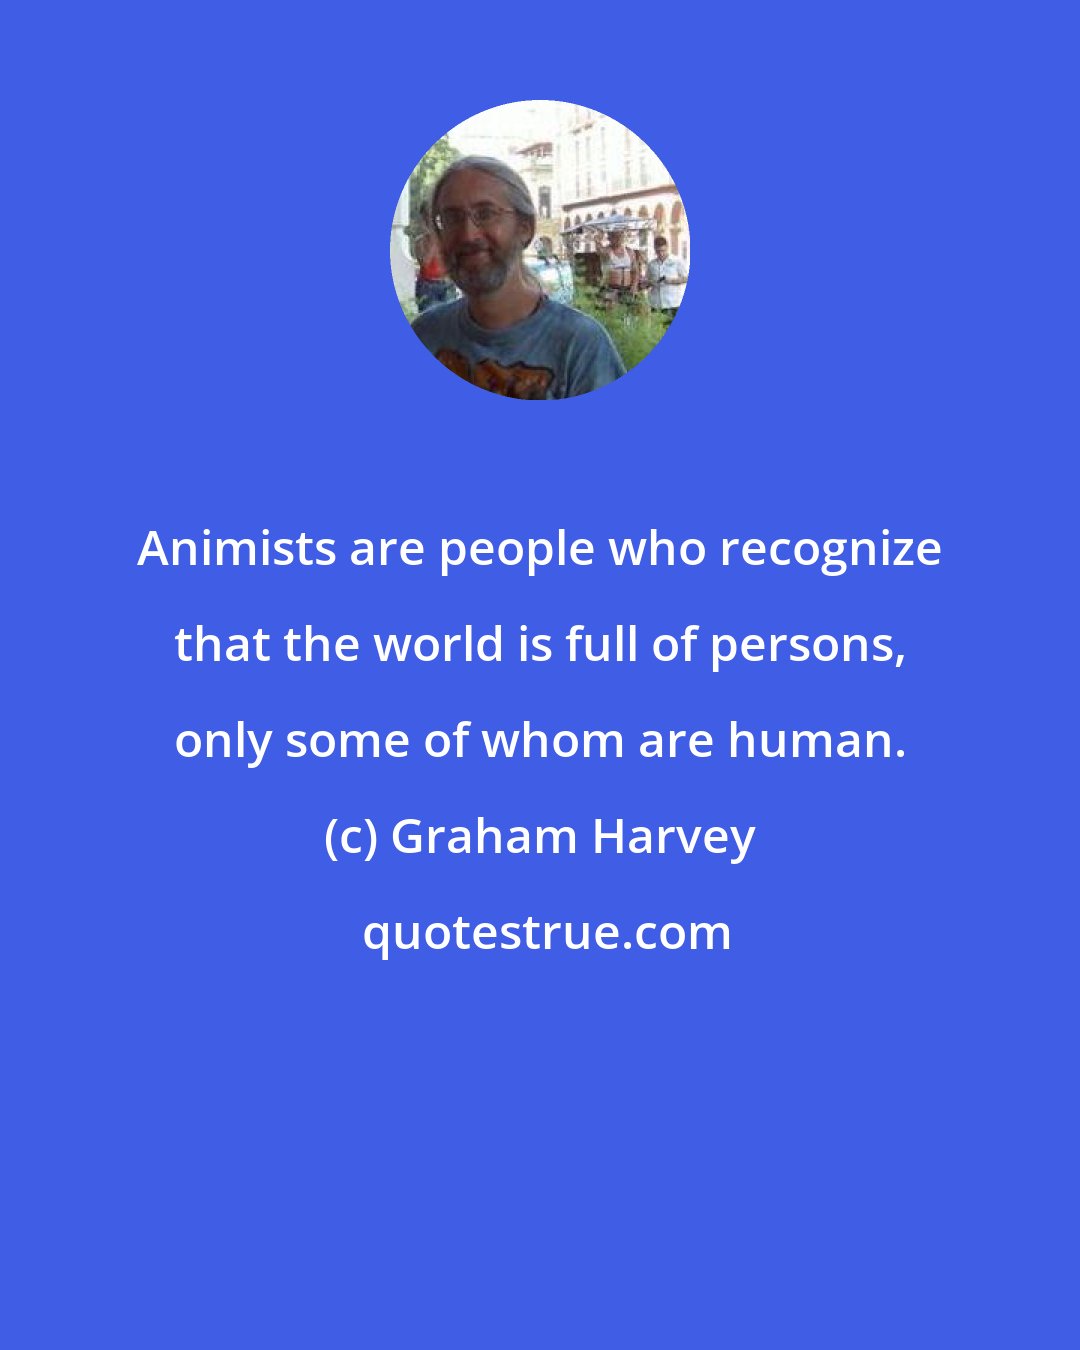 Graham Harvey: Animists are people who recognize that the world is full of persons, only some of whom are human.